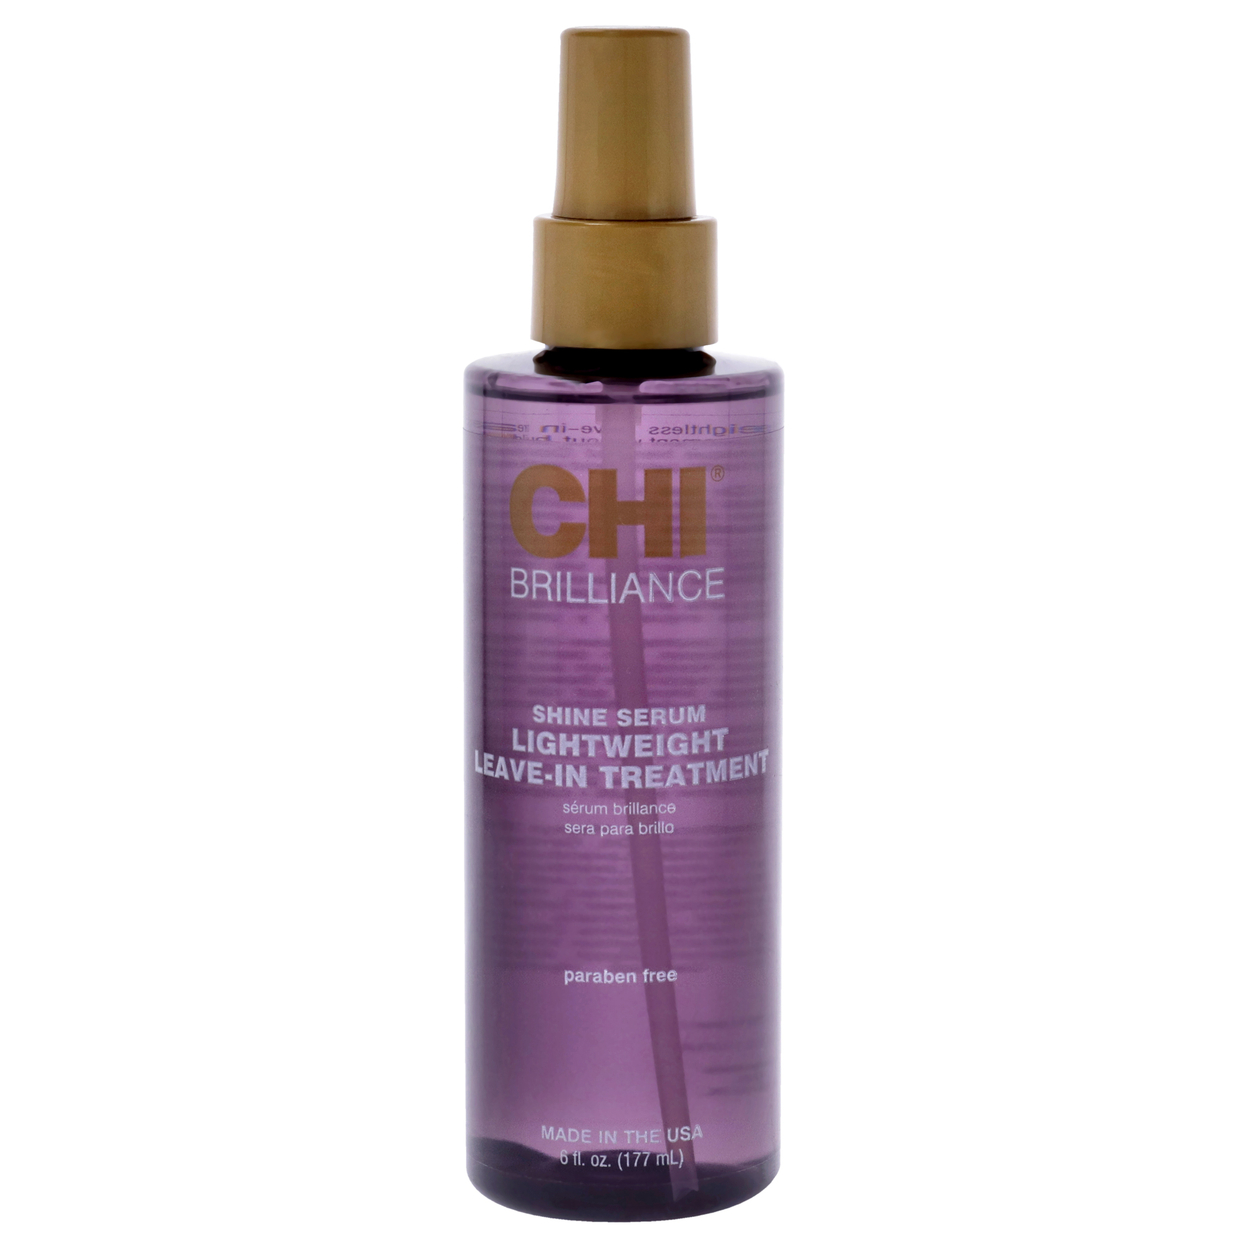 CHI Unisex HAIRCARE Deep Brilliance Lightweight Leave-In Treatment 6 Oz